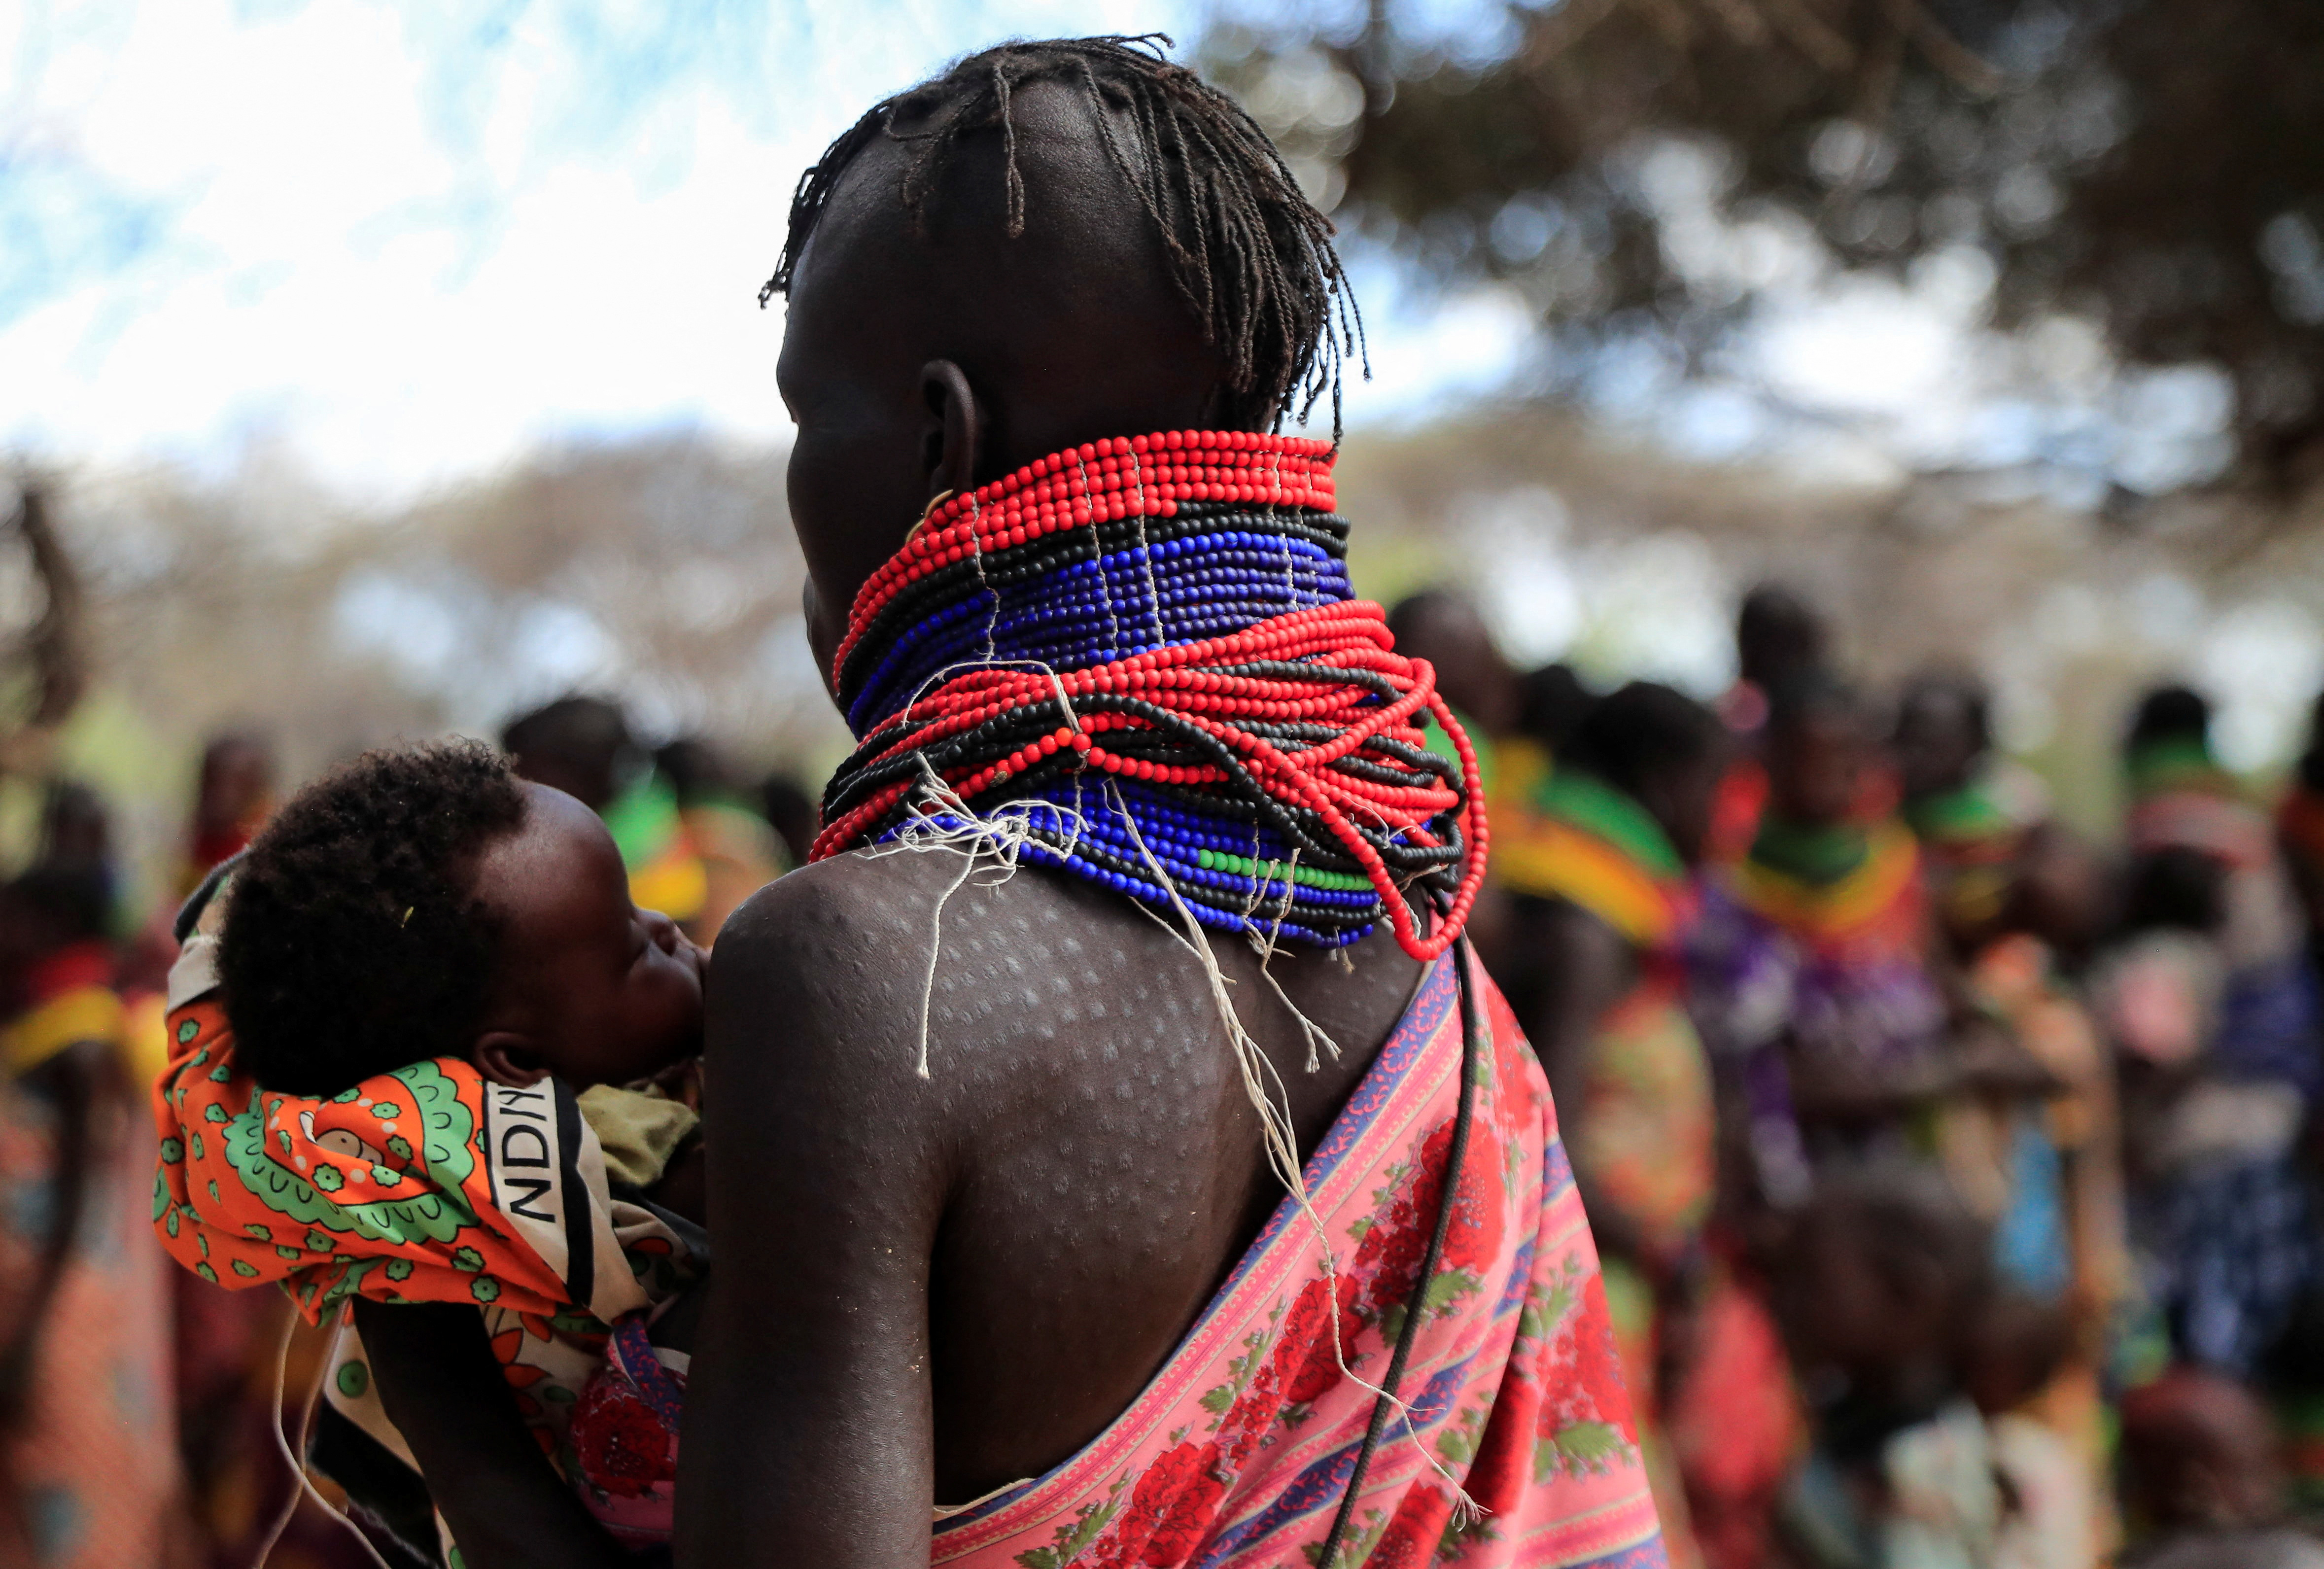 A woman and her child from the Turkana pastoralist community affected by the worsening drought due to failed rain seasons, arrive at an integrated outreach medical clinic in Kakimat village in Turkana